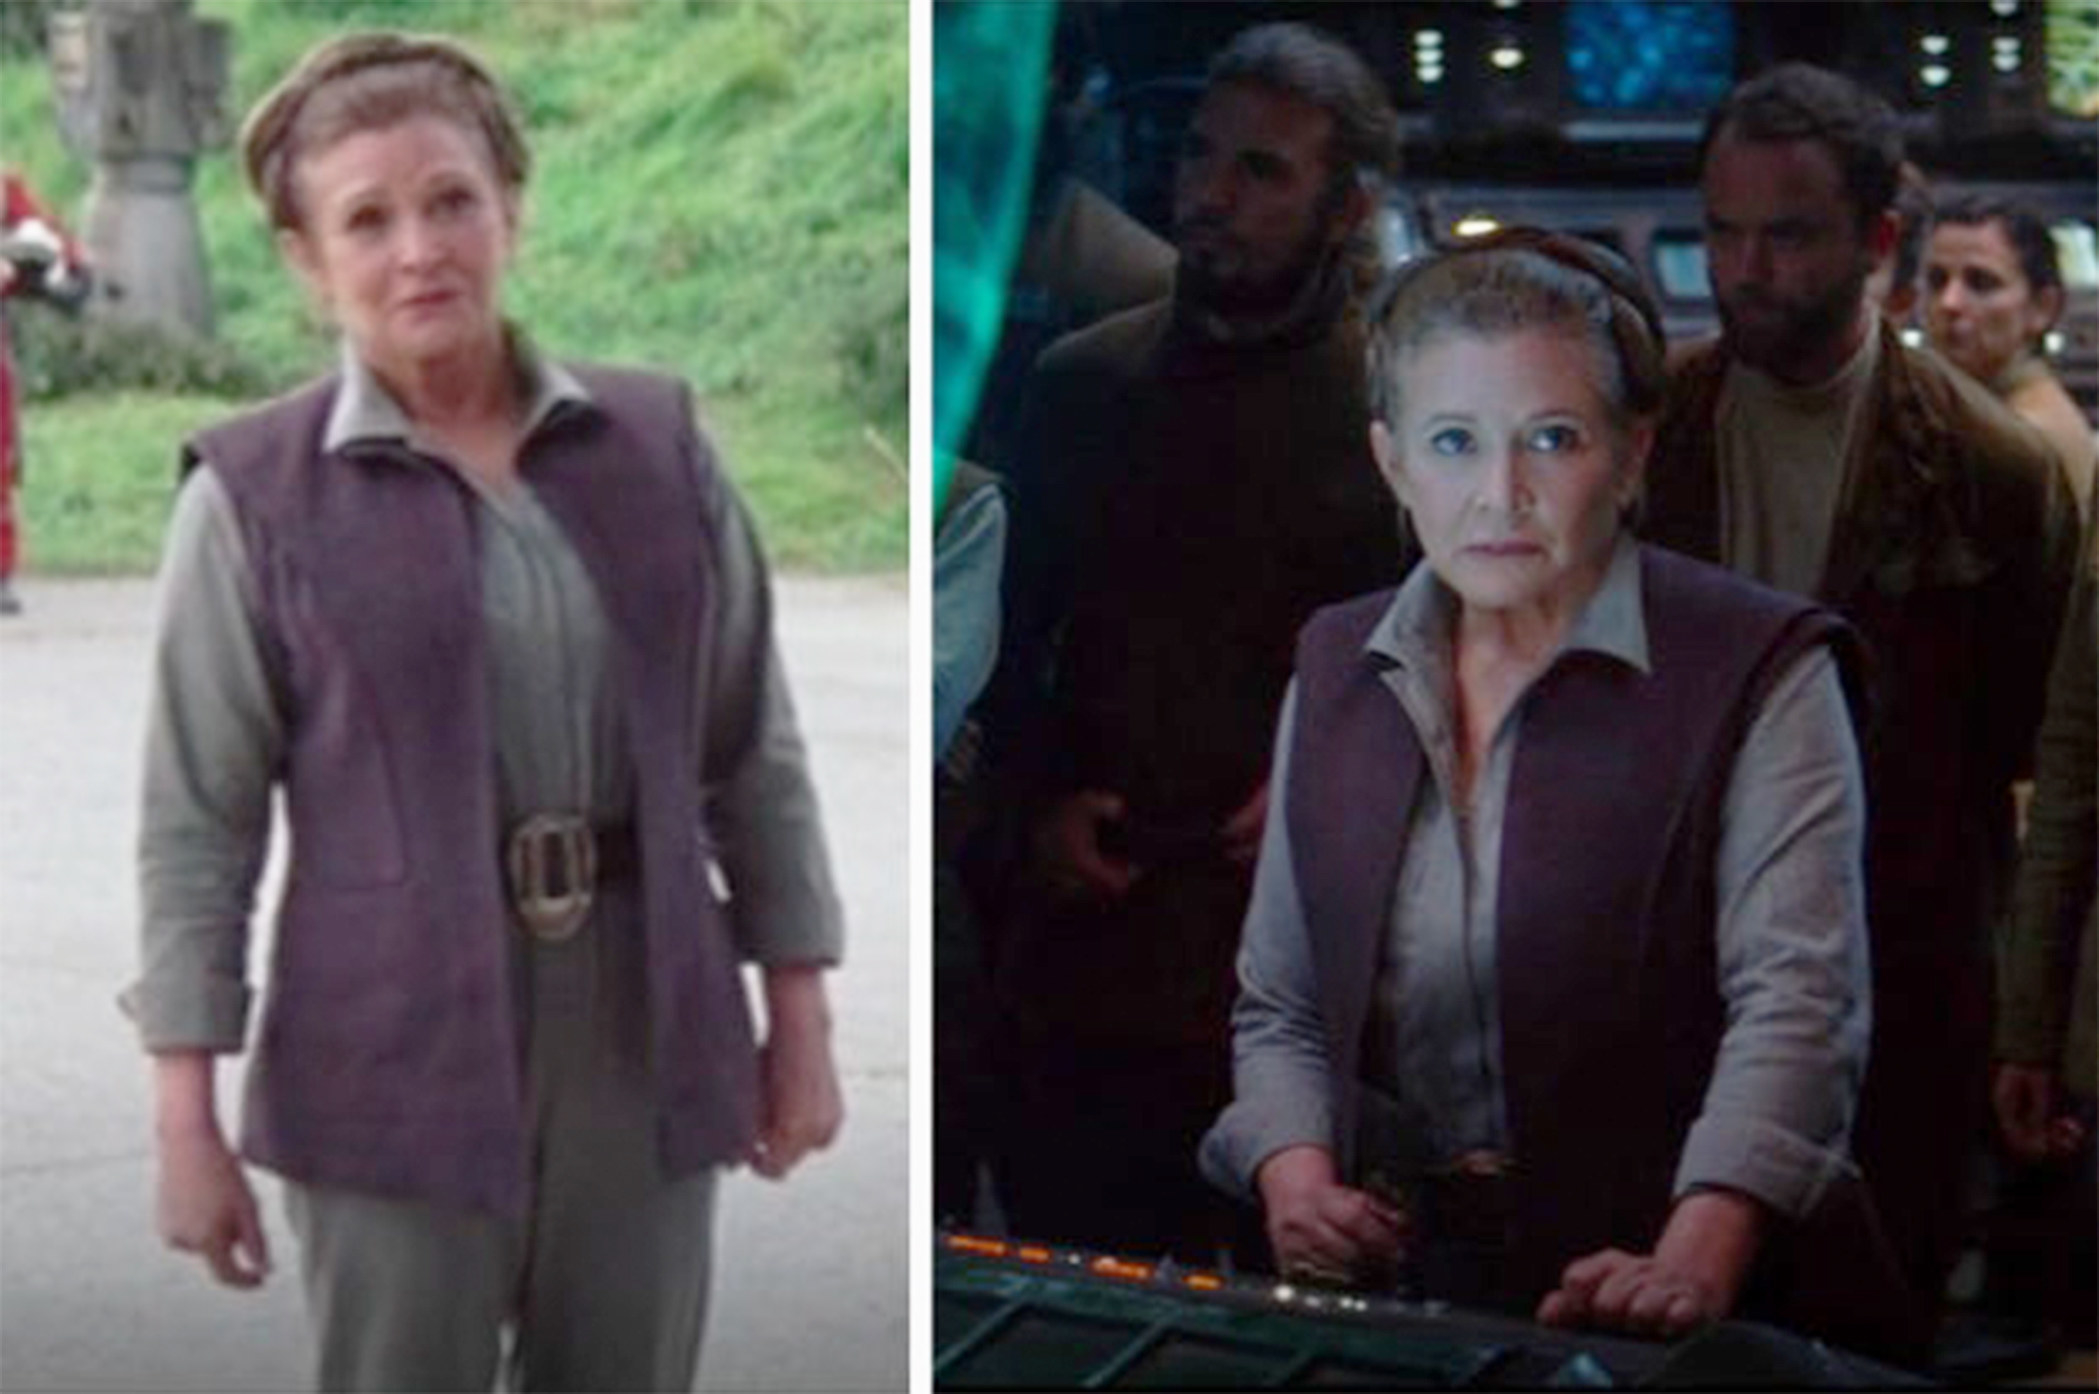 Left: Carrie Fisher as Princess Leia wears a vest over a button up shirt in &quot;The Force Awakens&quot; Right: Carrie Fisher as Princess Leia looks up from her place at a console in &quot;The Force Awakens&quot;